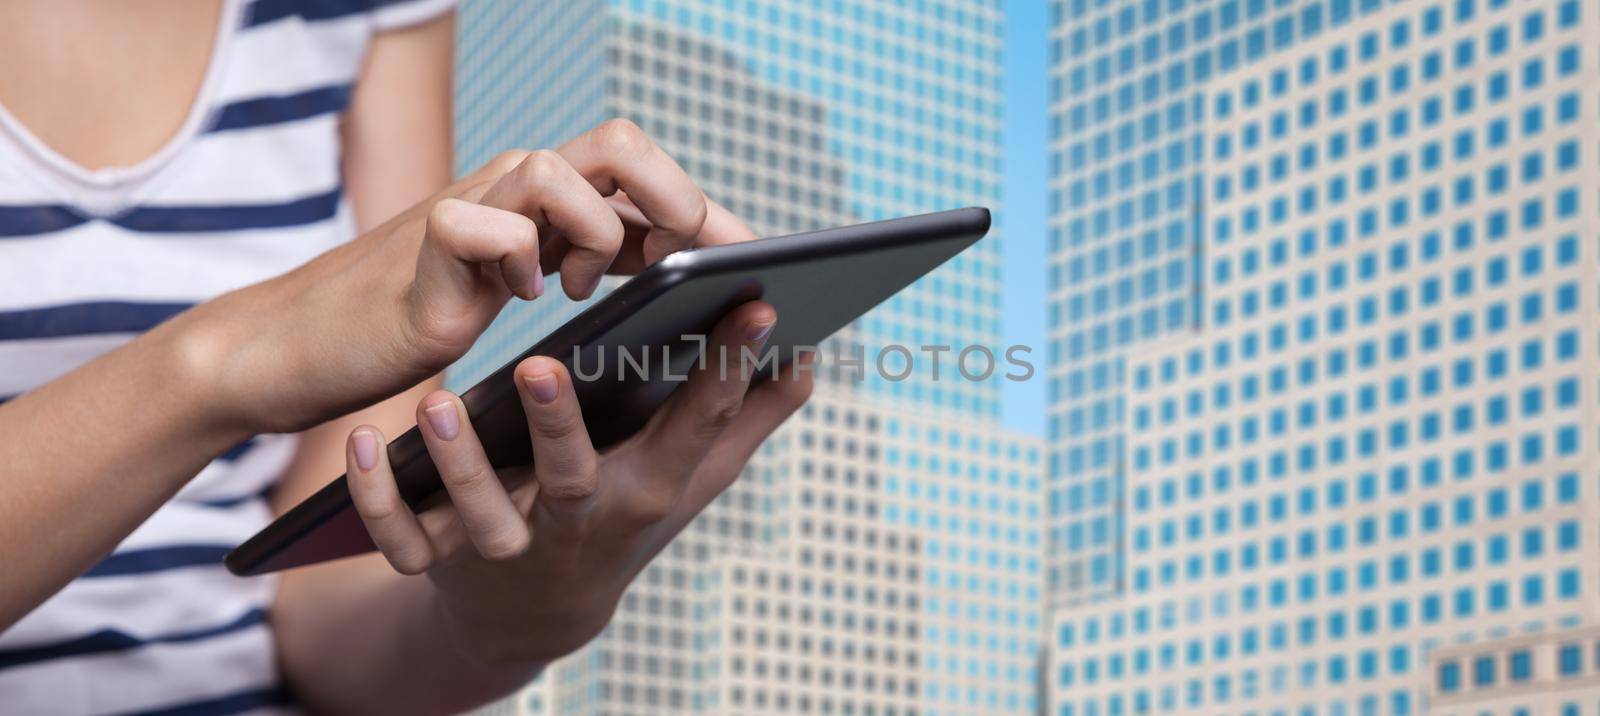 Online Booking in New York City. Hotel reservation via Internet. Young woman uses a tablet PC for hotel reservation against Manhattan background